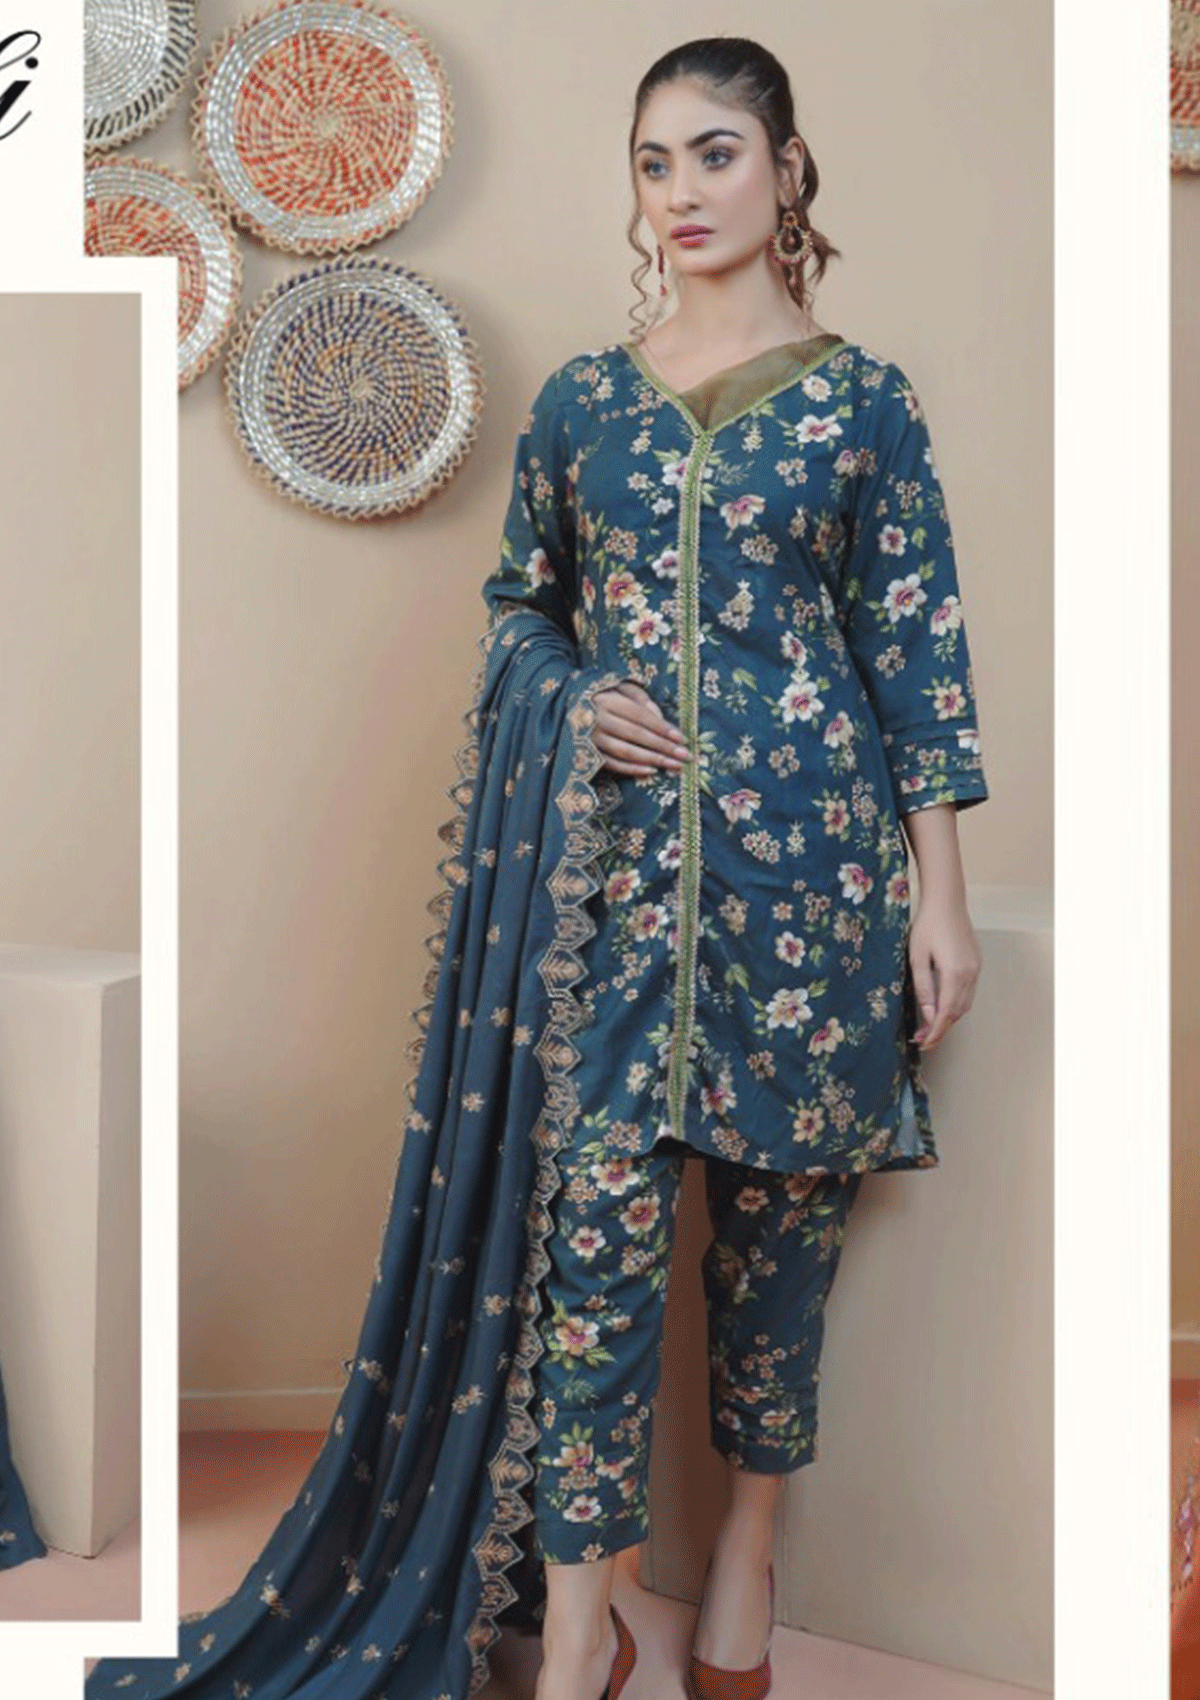 Winter Collection - Rangoli - Embroidered - REL#5 available at Saleem Fabrics Traditions